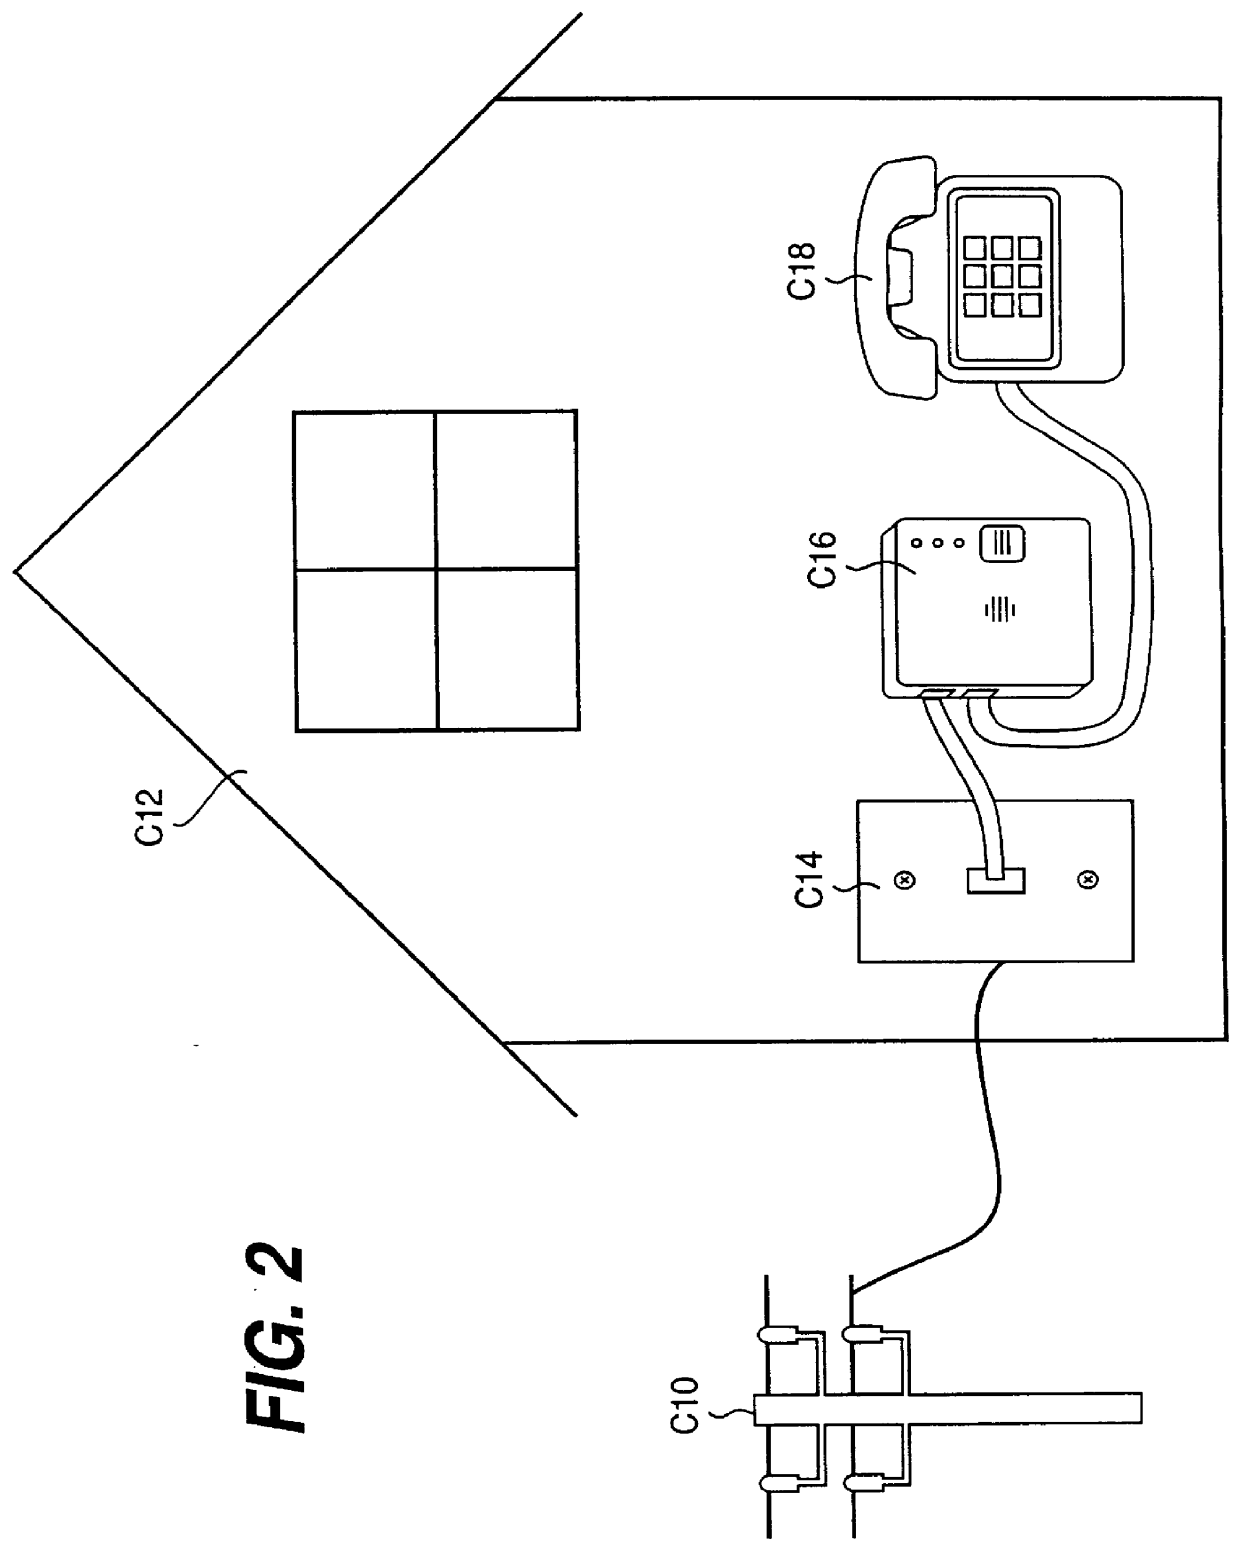 Community alarm/notification device, method and system